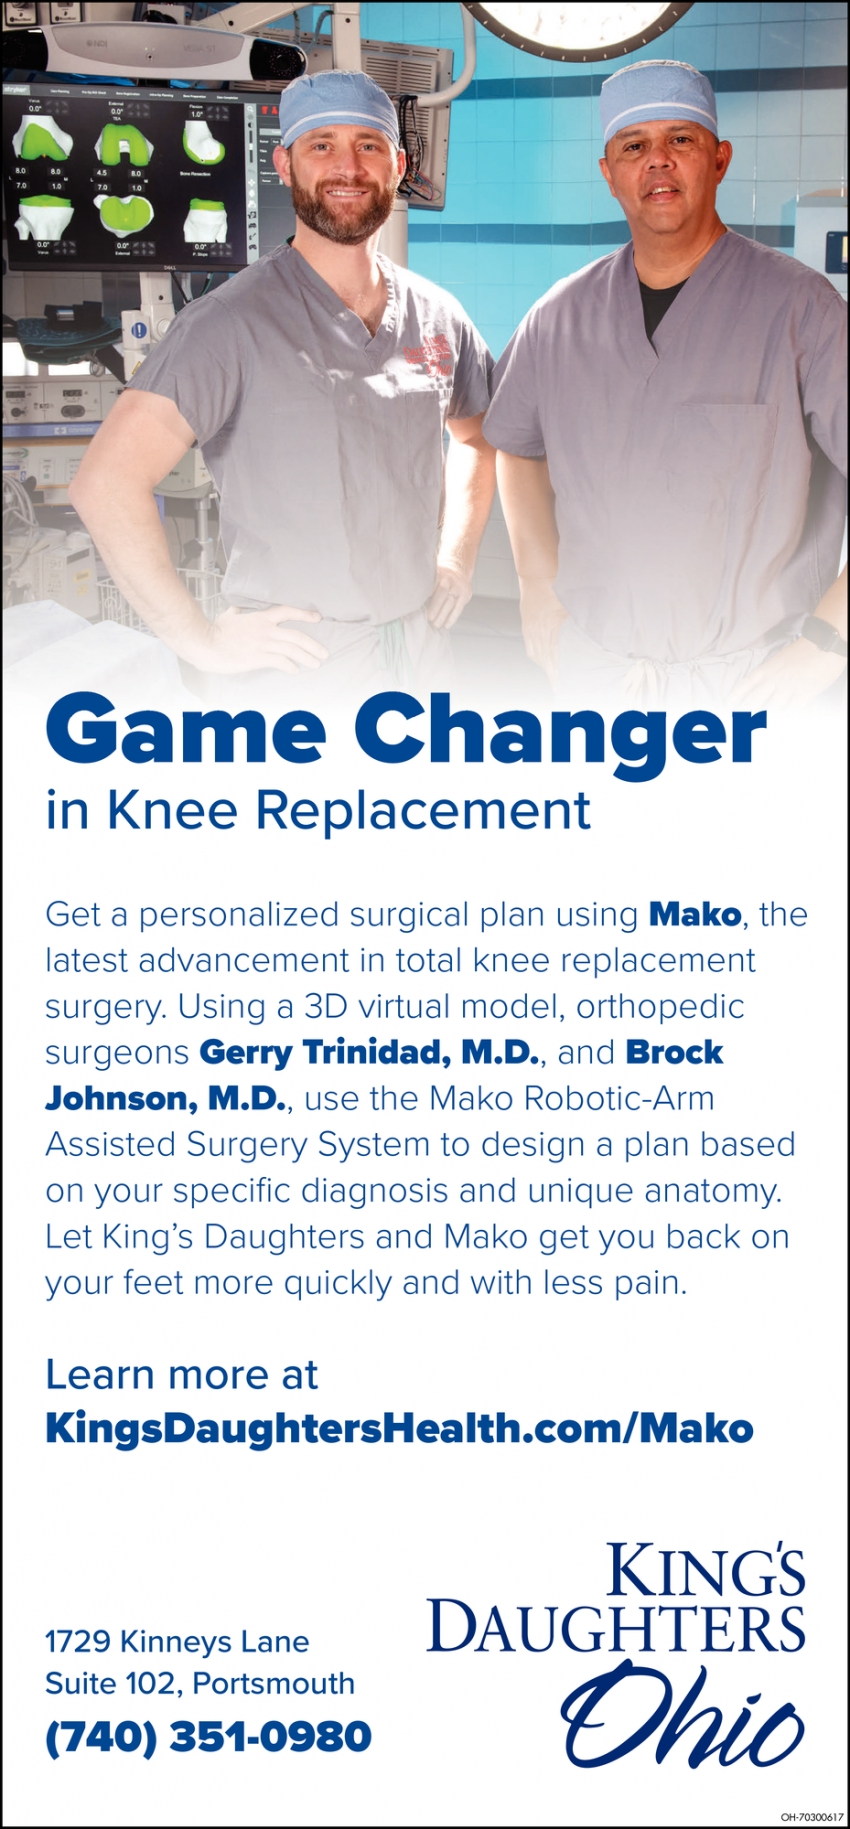 Game Changer in Knee Replacement